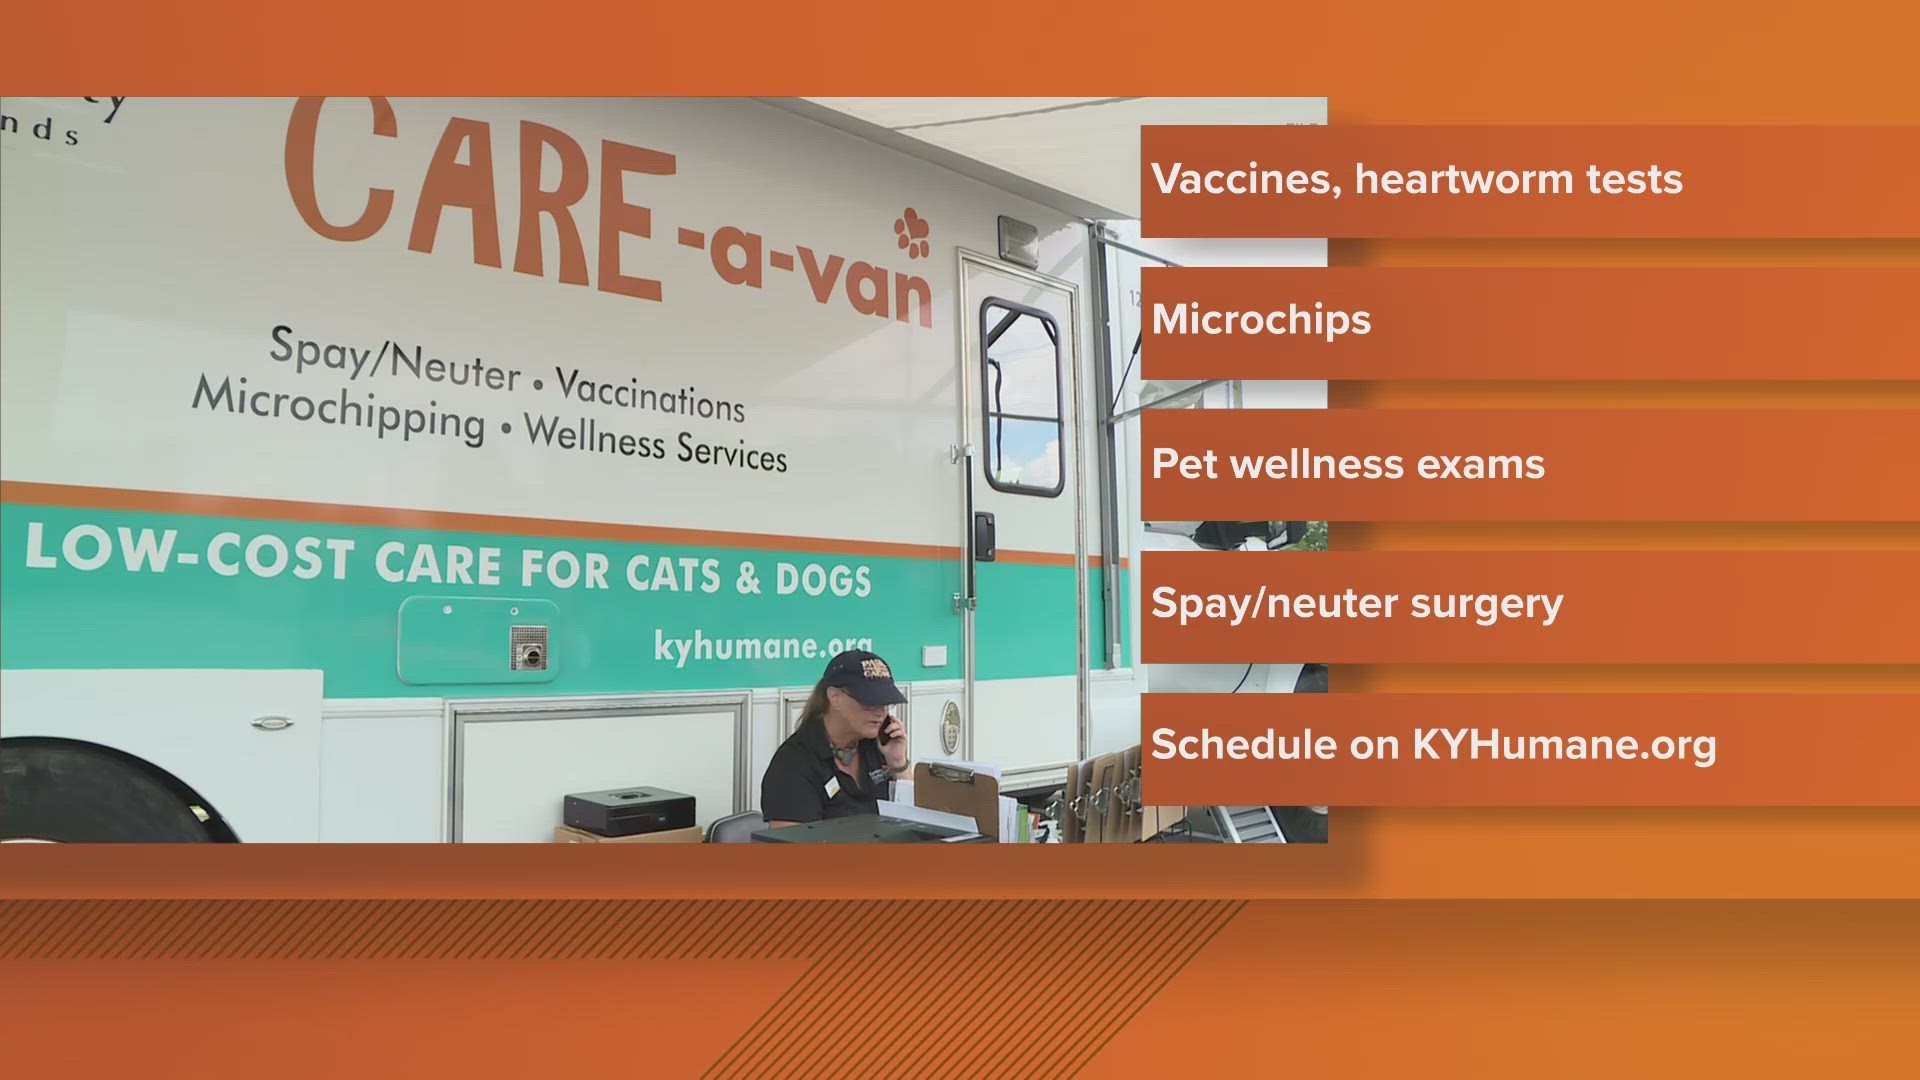 The "Care-A-Van" is providing affordable pet wellness services across Kentucky.